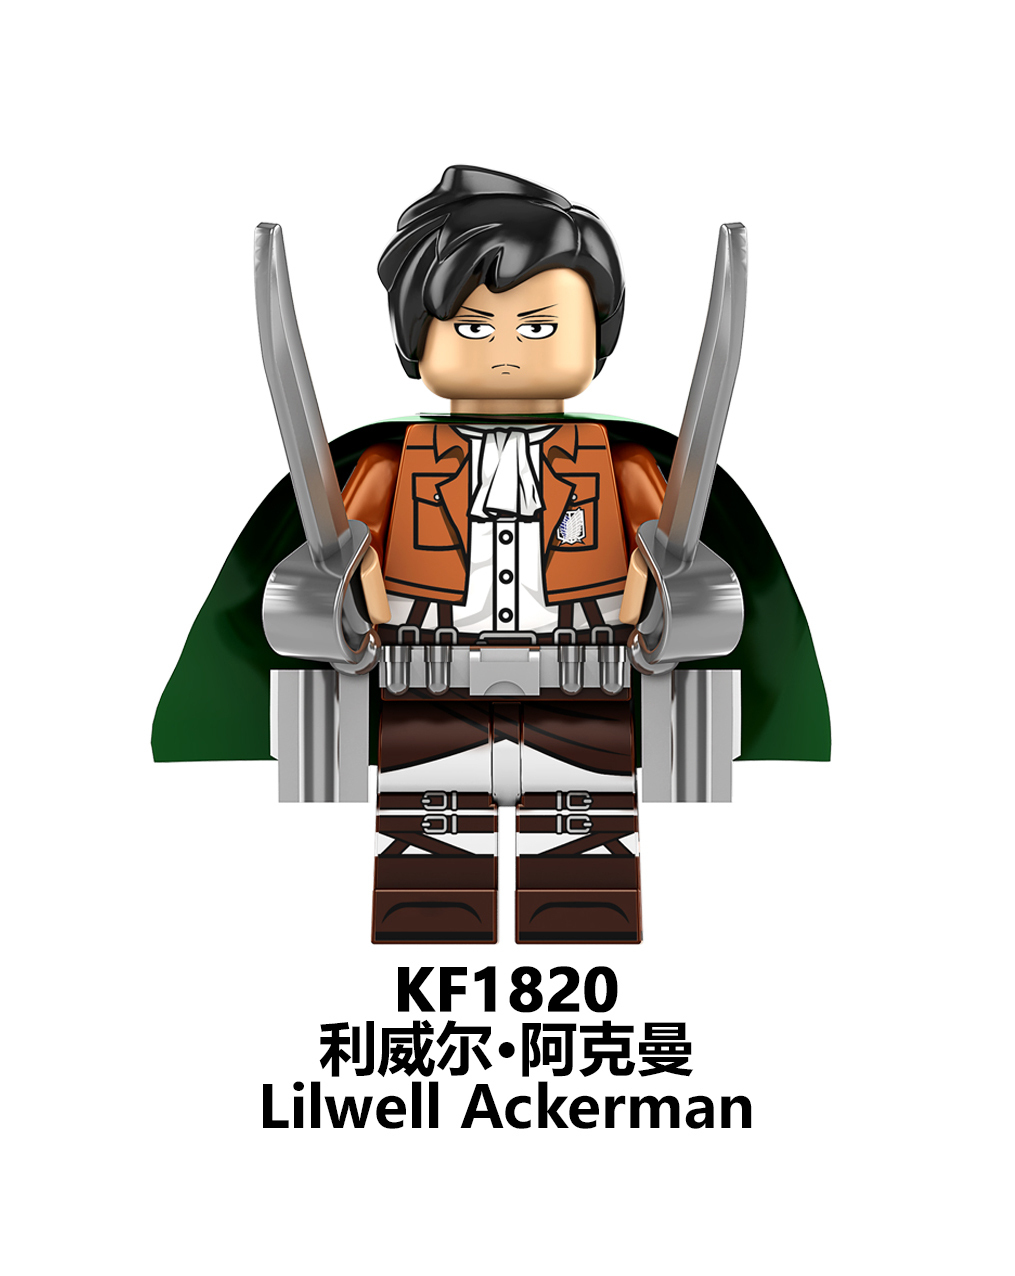 KF6174 KF1820 KF1821 KF1822 KF1823 KF1824 KF1825 KF1826 KF1827 Attack on Titan Building Blocks Action Figures Educational Toys For Kids